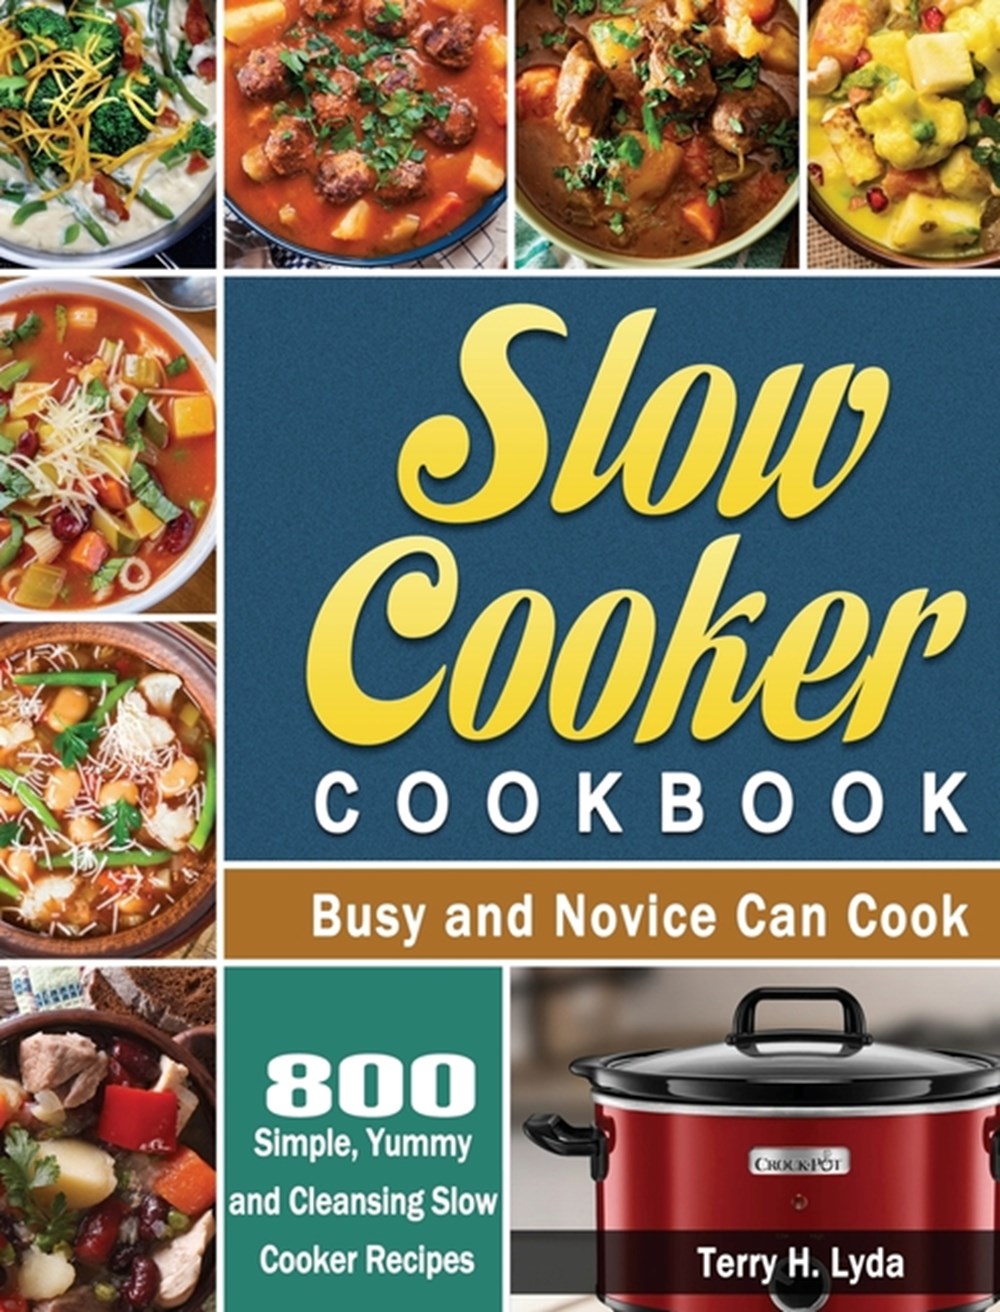 Slow Cooker Cookbook: 800 Simple, Yummy and Cleansing Slow Cooker Recipes that Busy and Novice Can C